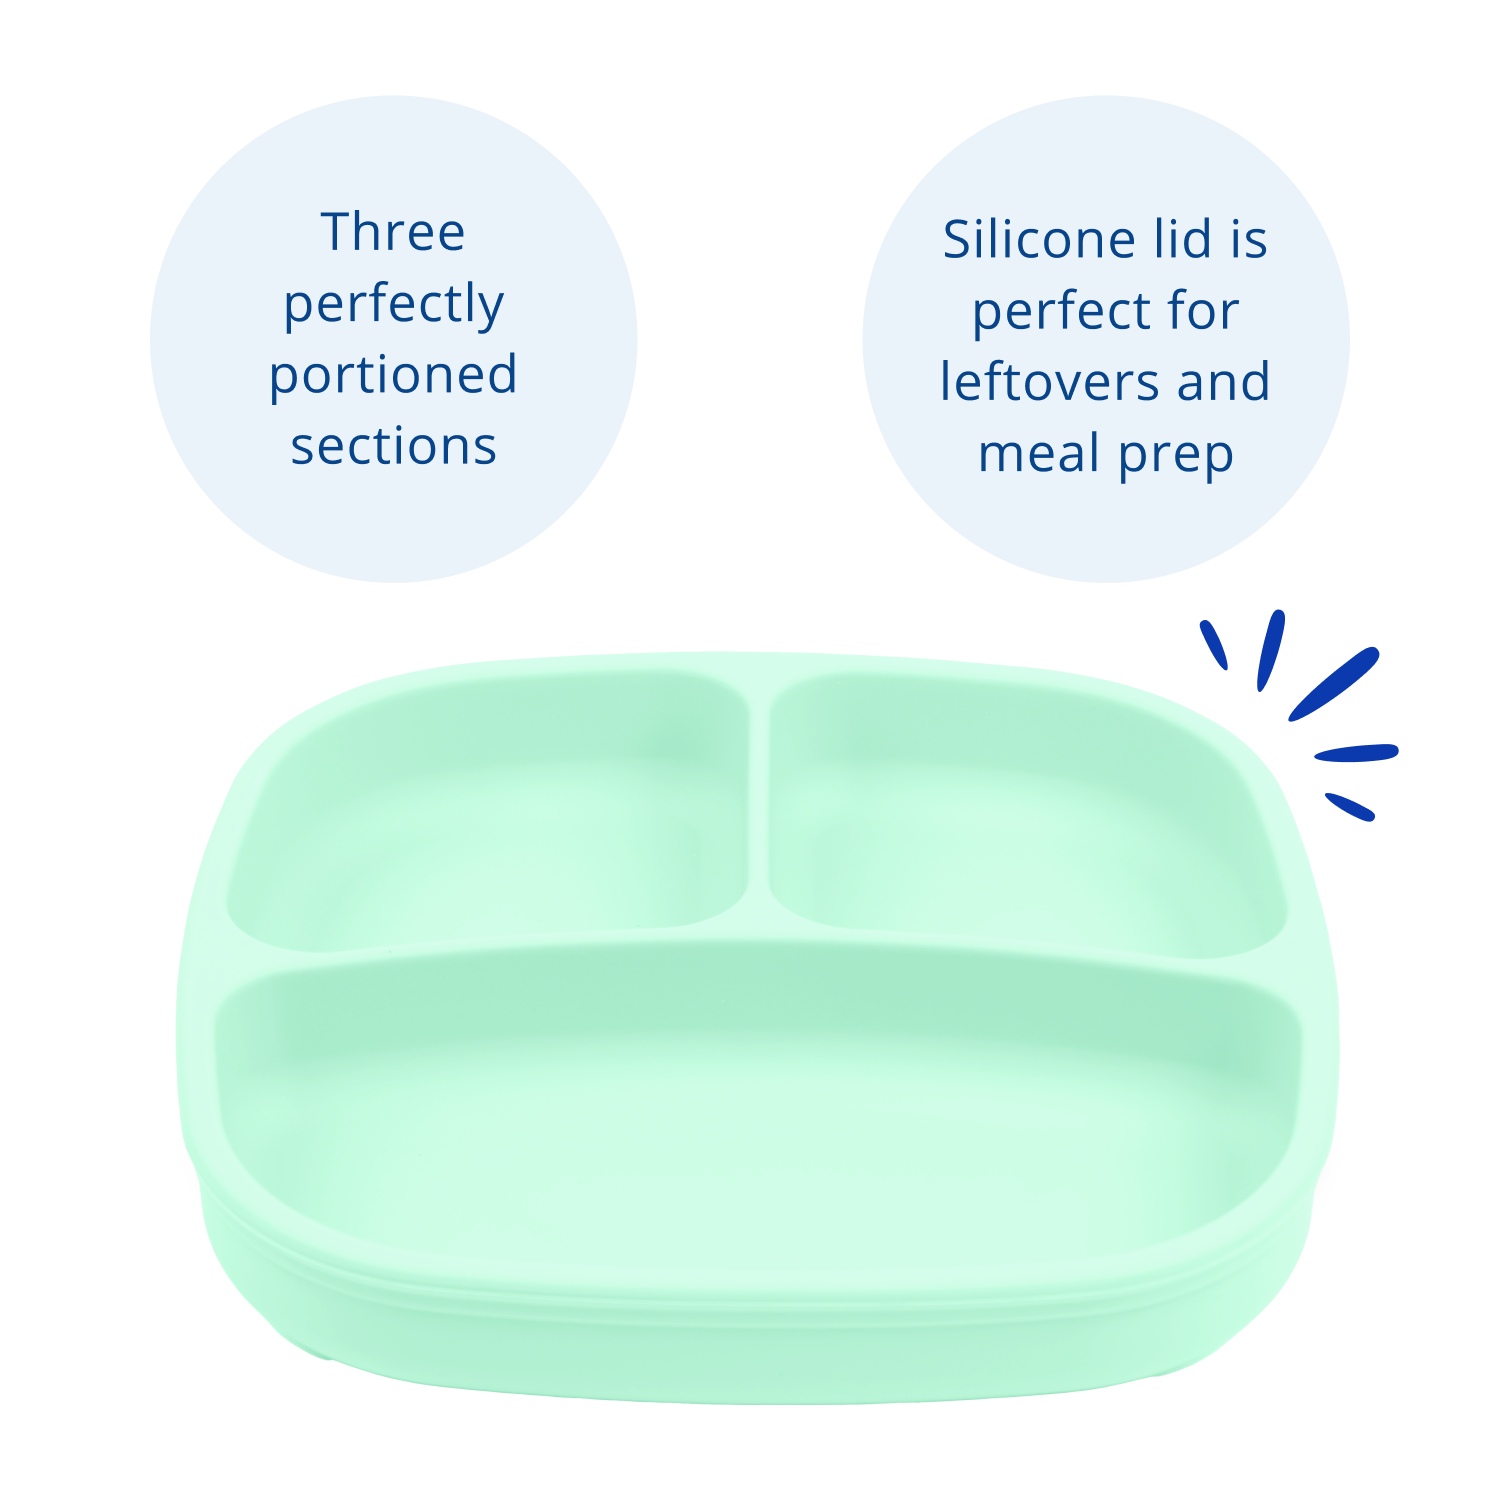 BPA-Free Kids Divided Plates with Lids, 5-Sections, & Suction-Grip